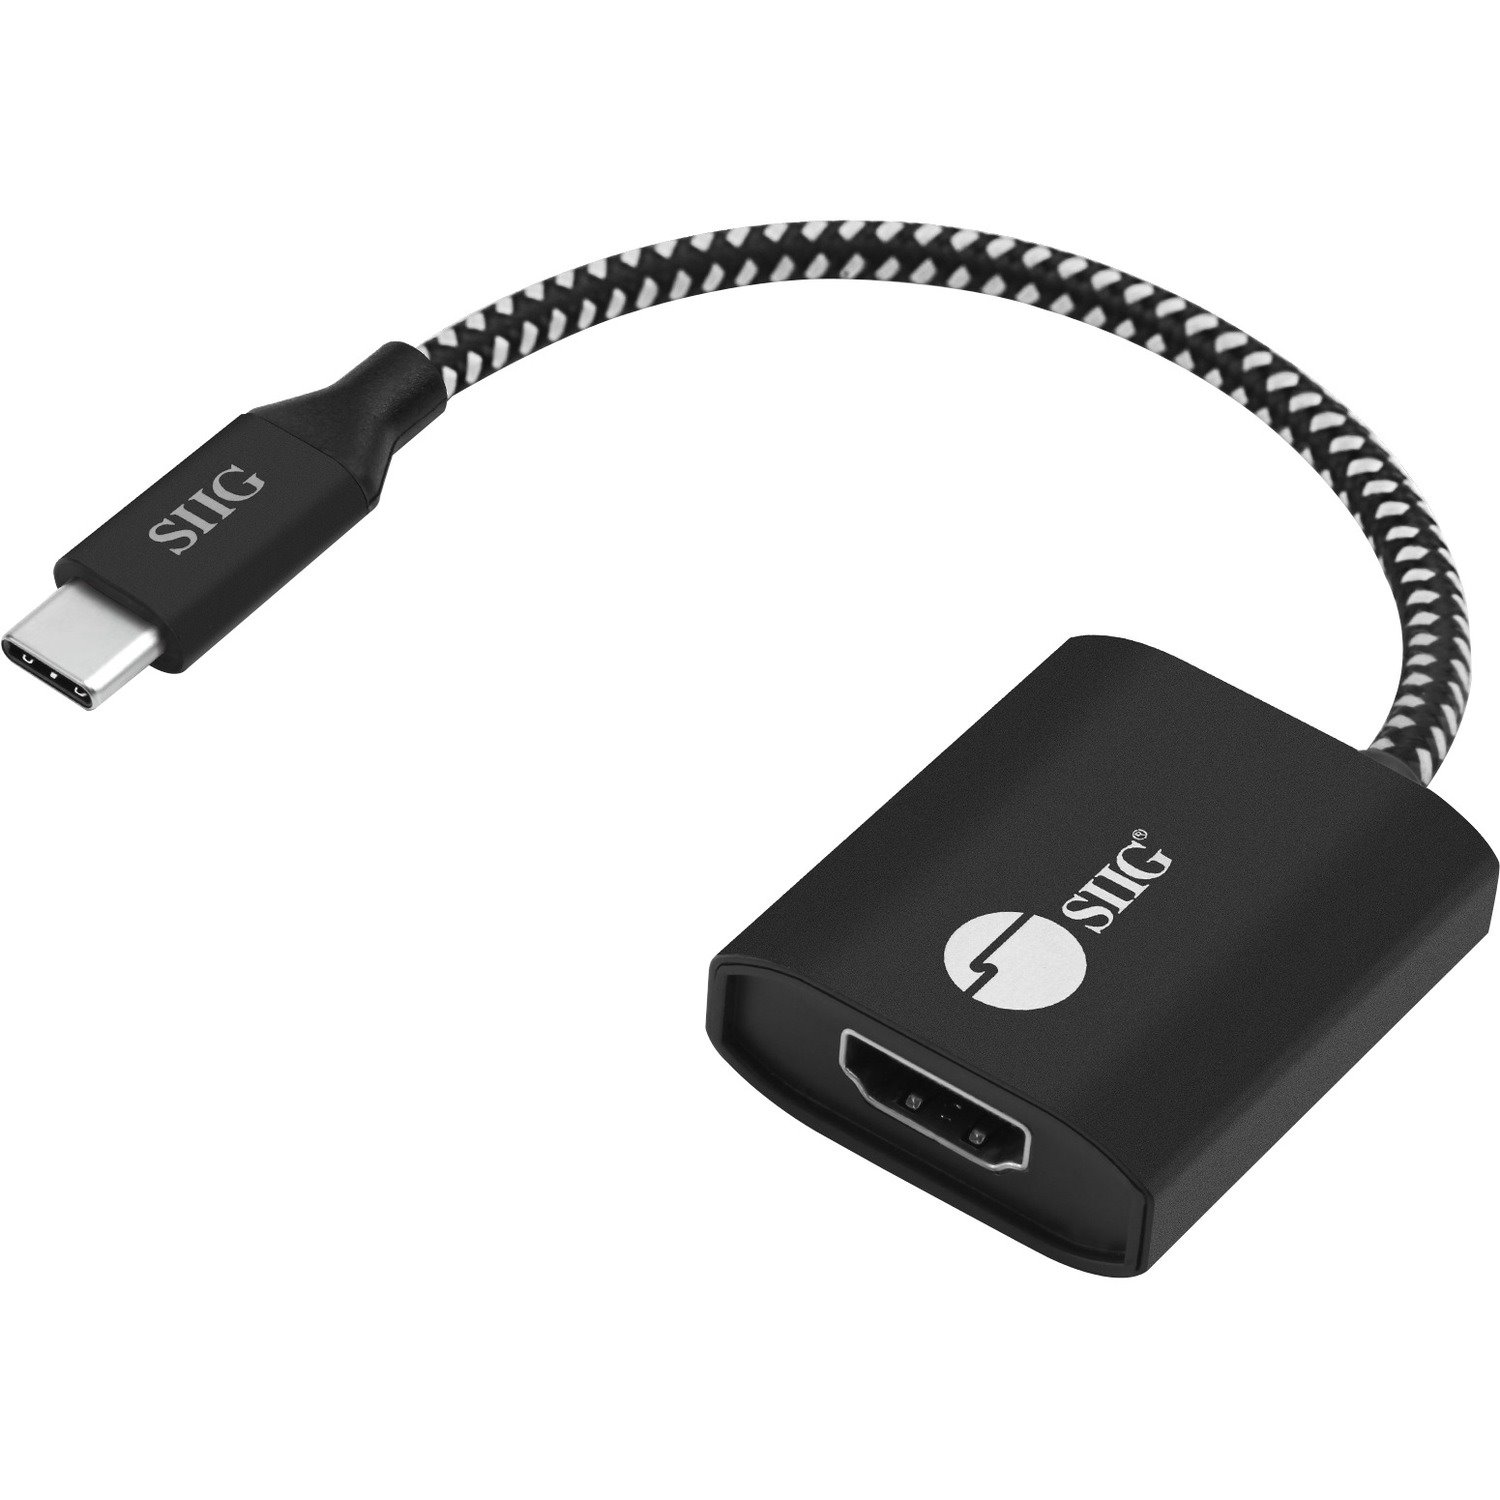 SIIG USB Type-C to HDMI Video Cable Adapter with PD Charging